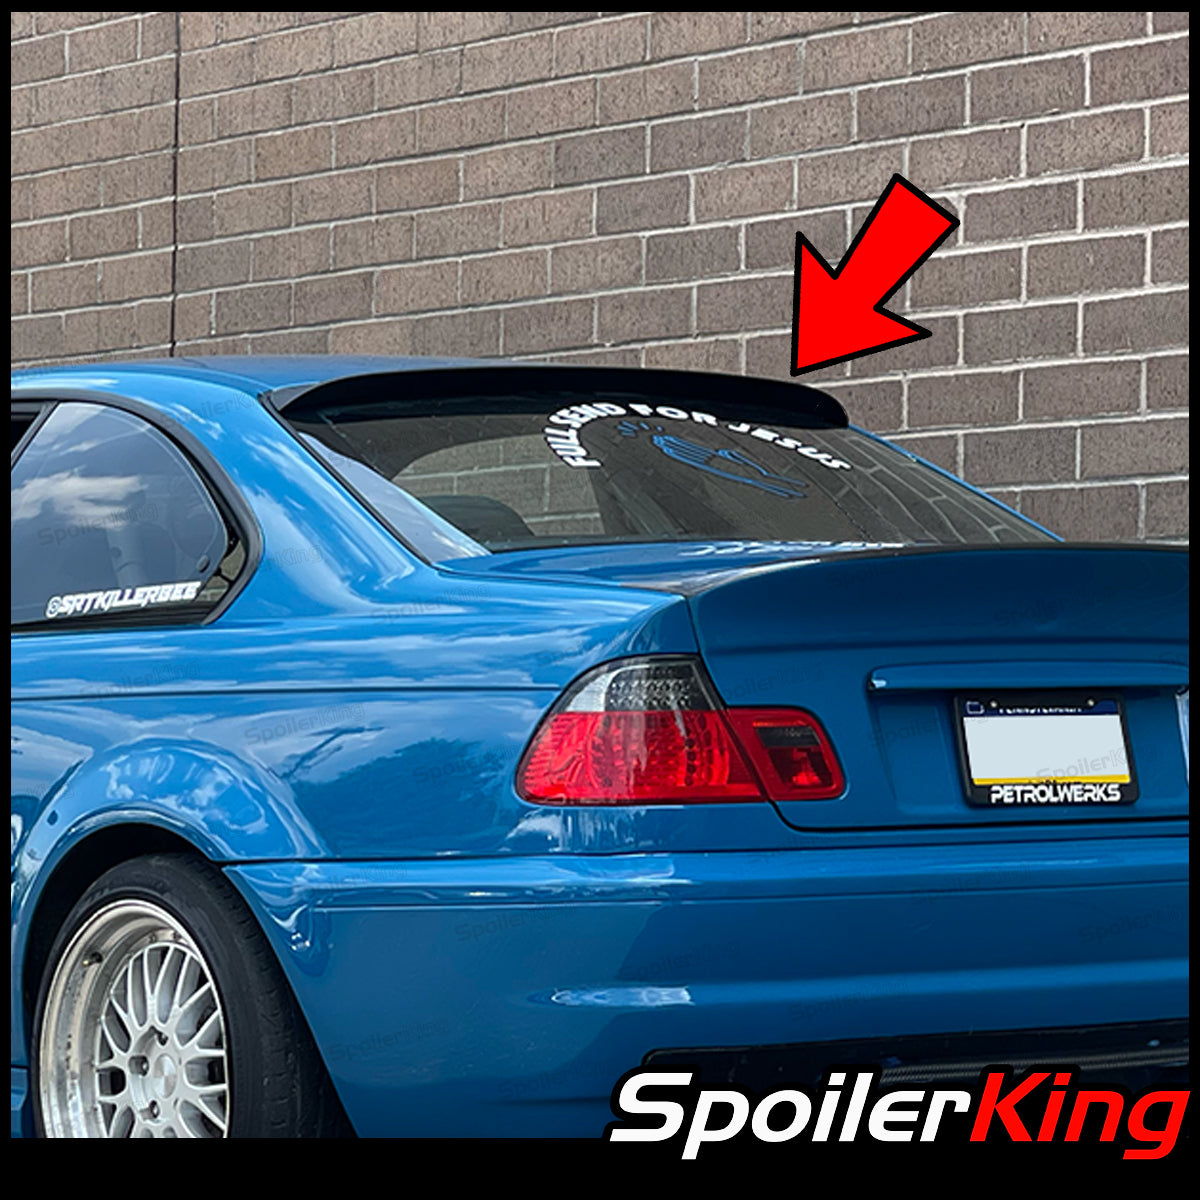 LTW-GT Low Kick Rear trunk Spoiler wing for BMW E46 Coupe Cabrio + M3 ABS